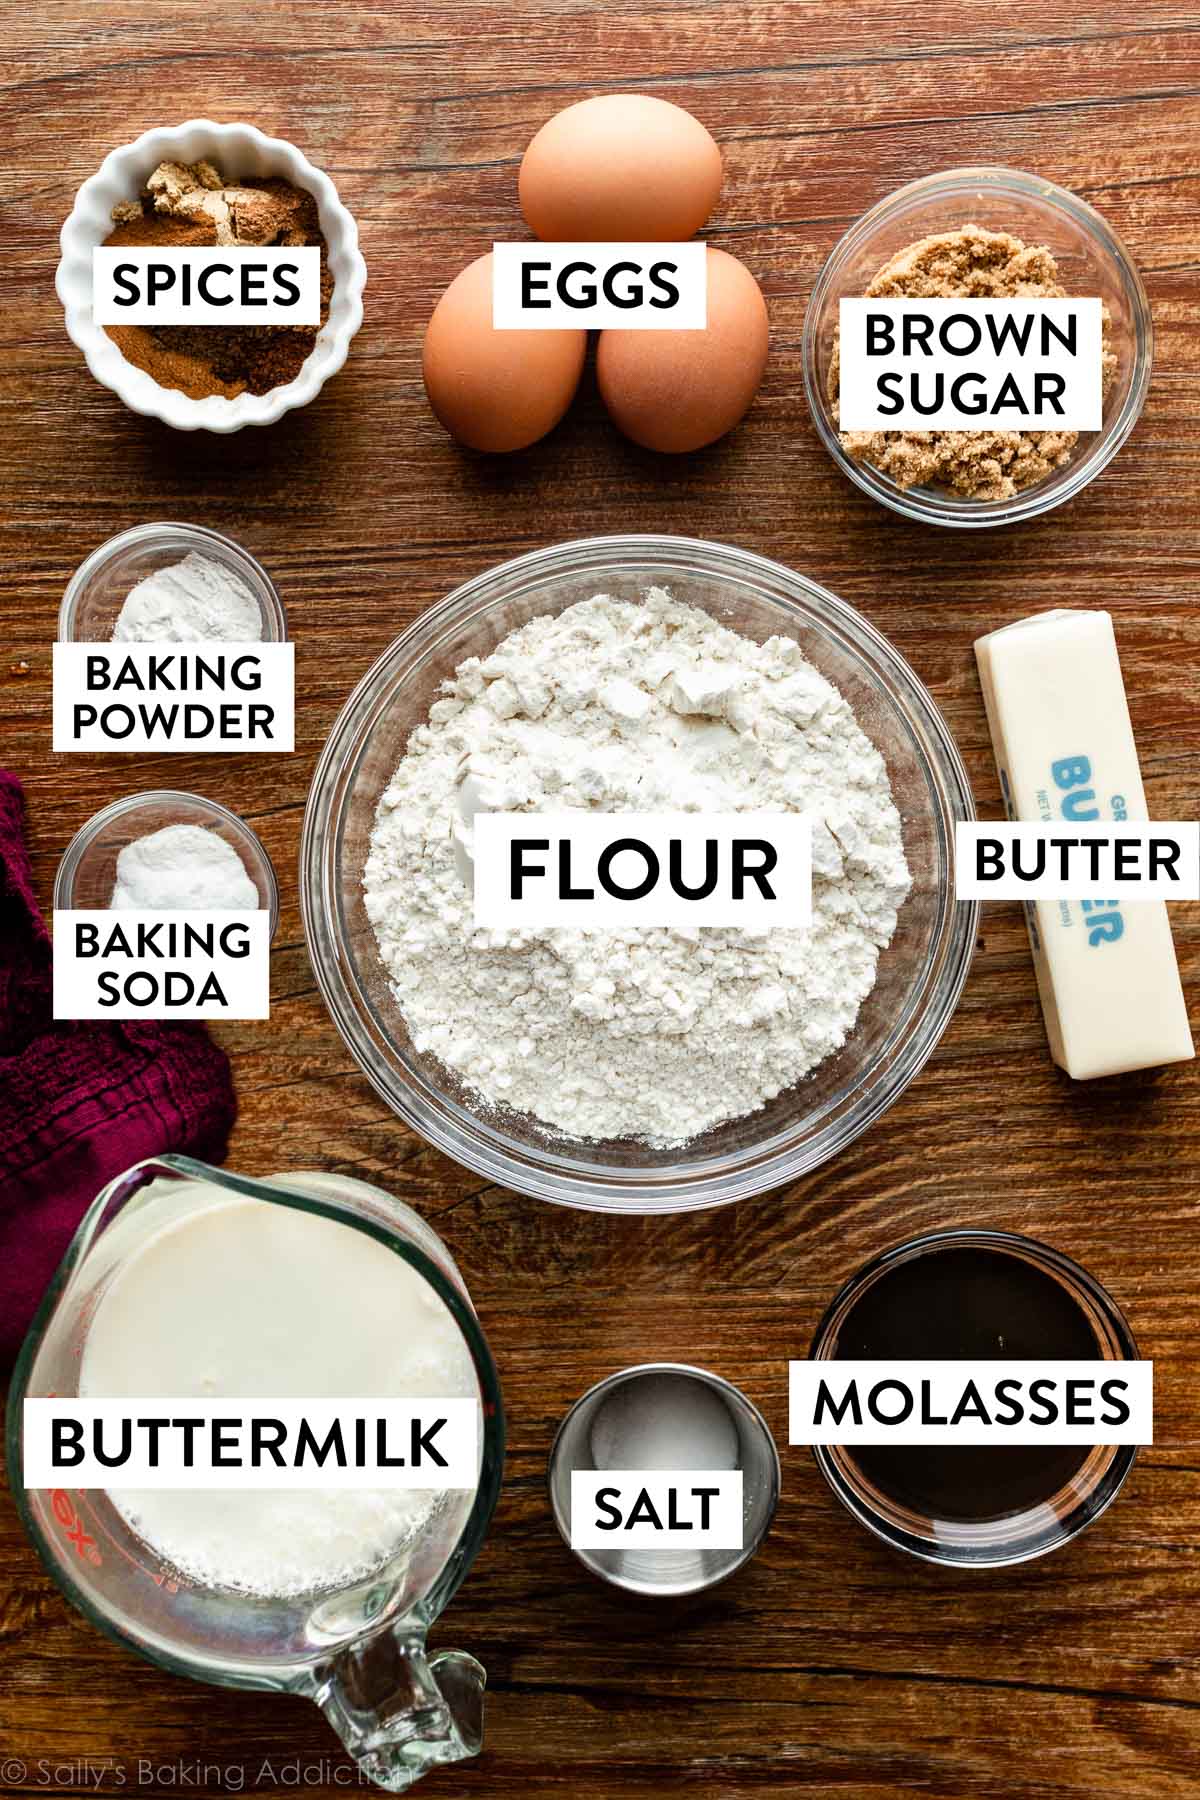 ingredients on wooden backdrop including eggs, flour, molasses, spices, buttermilk, butter, and brown sugar.